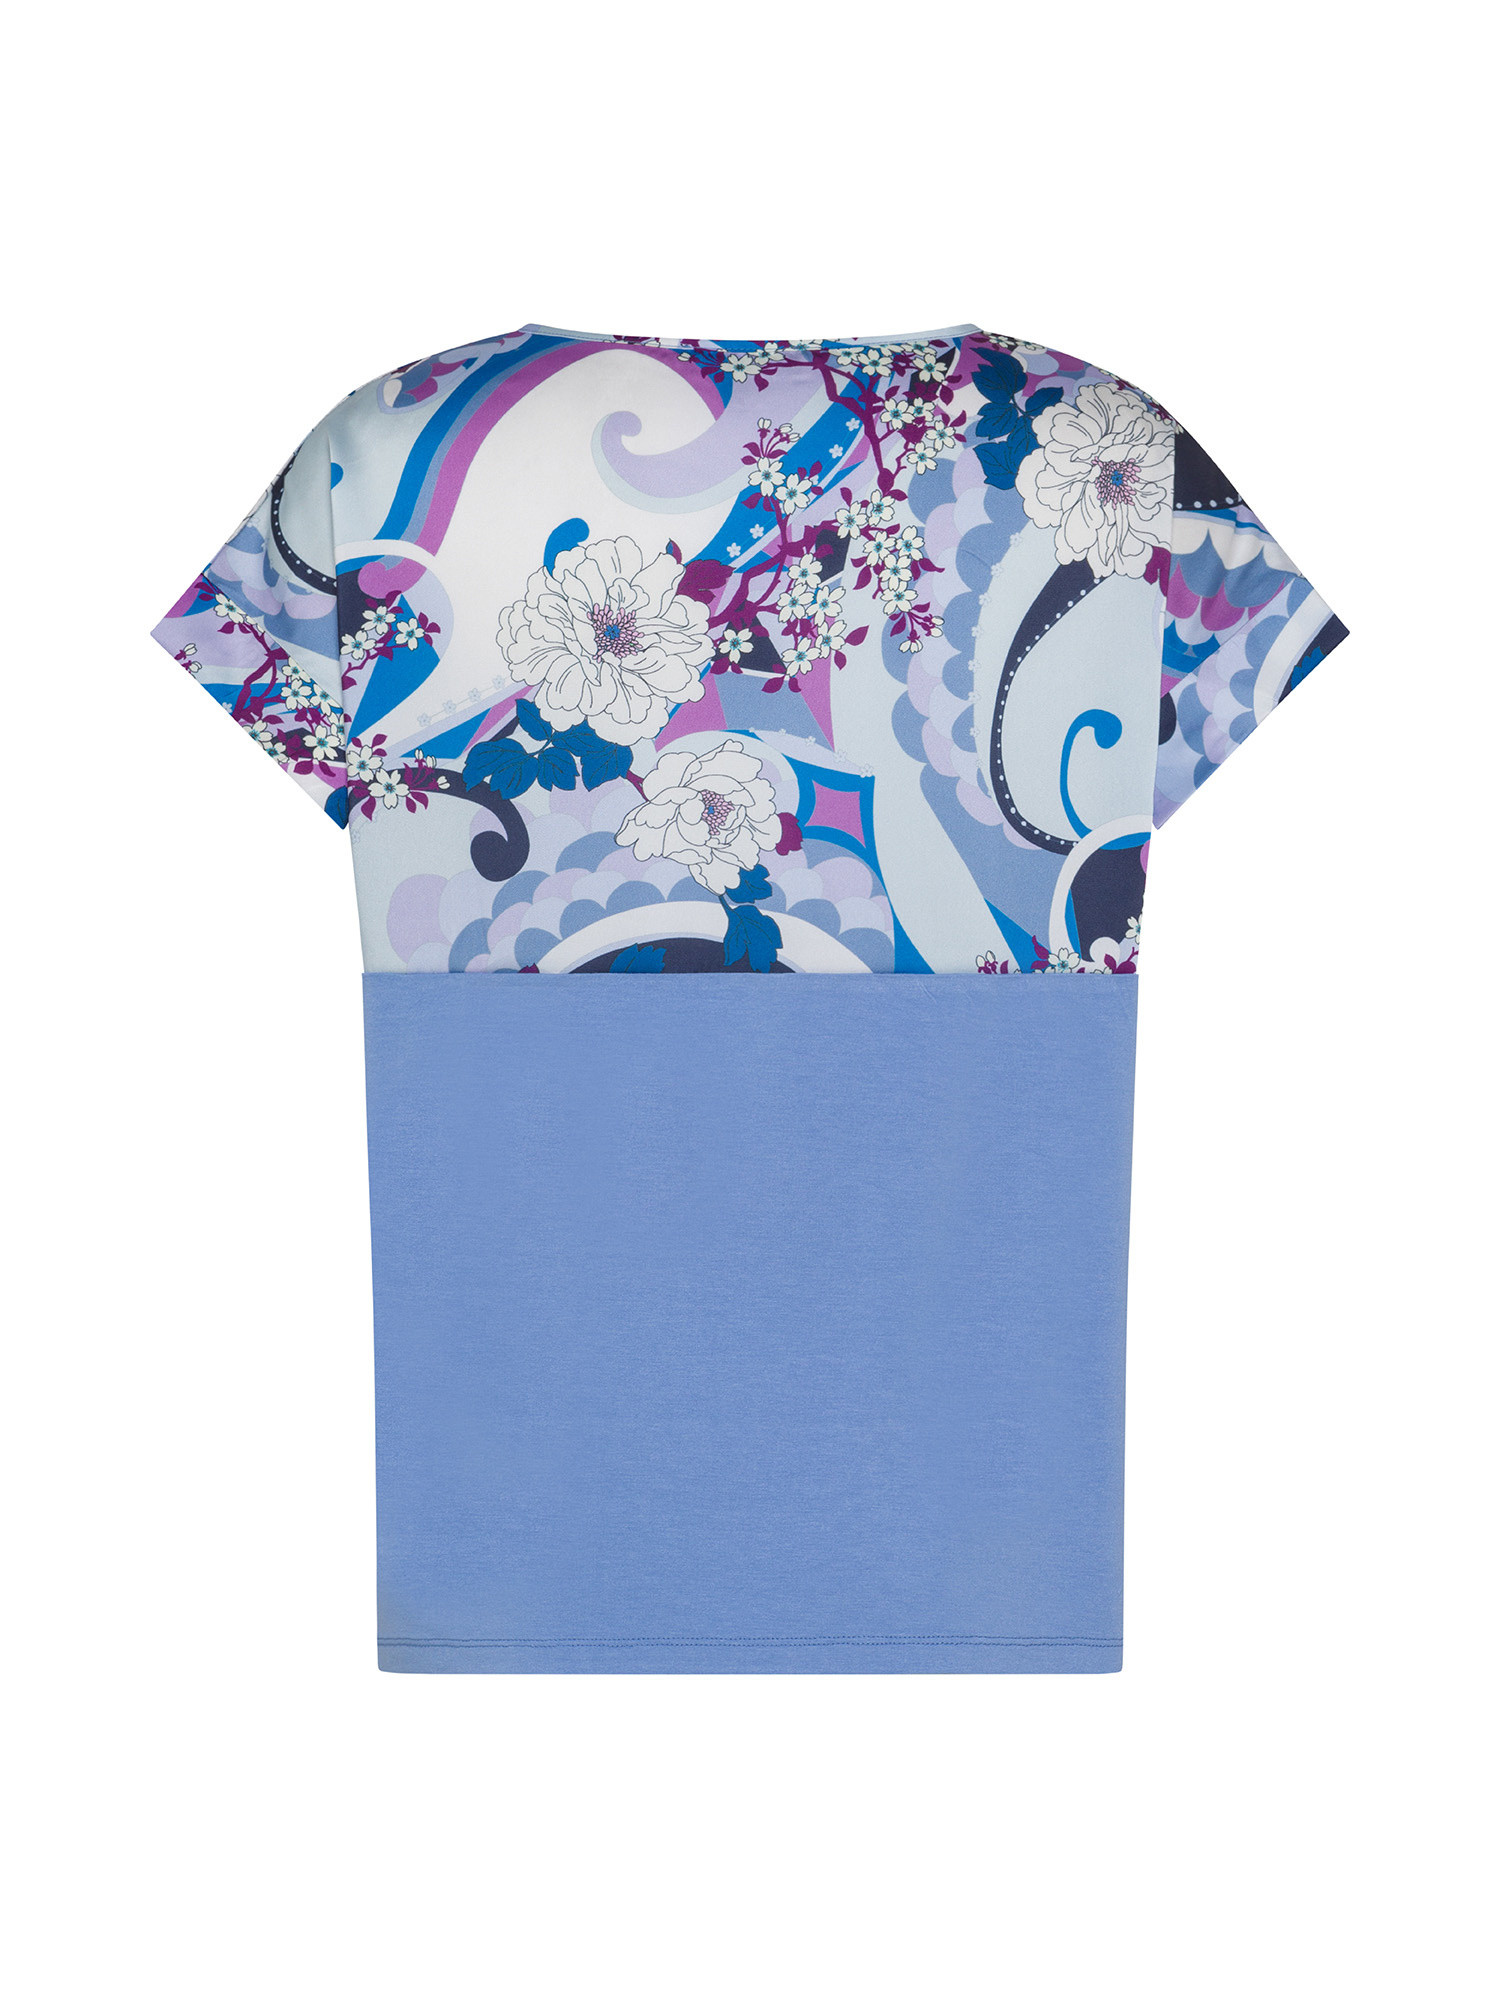 Koan - T-shirt with micro pattern, Aviation Blue, large image number 1